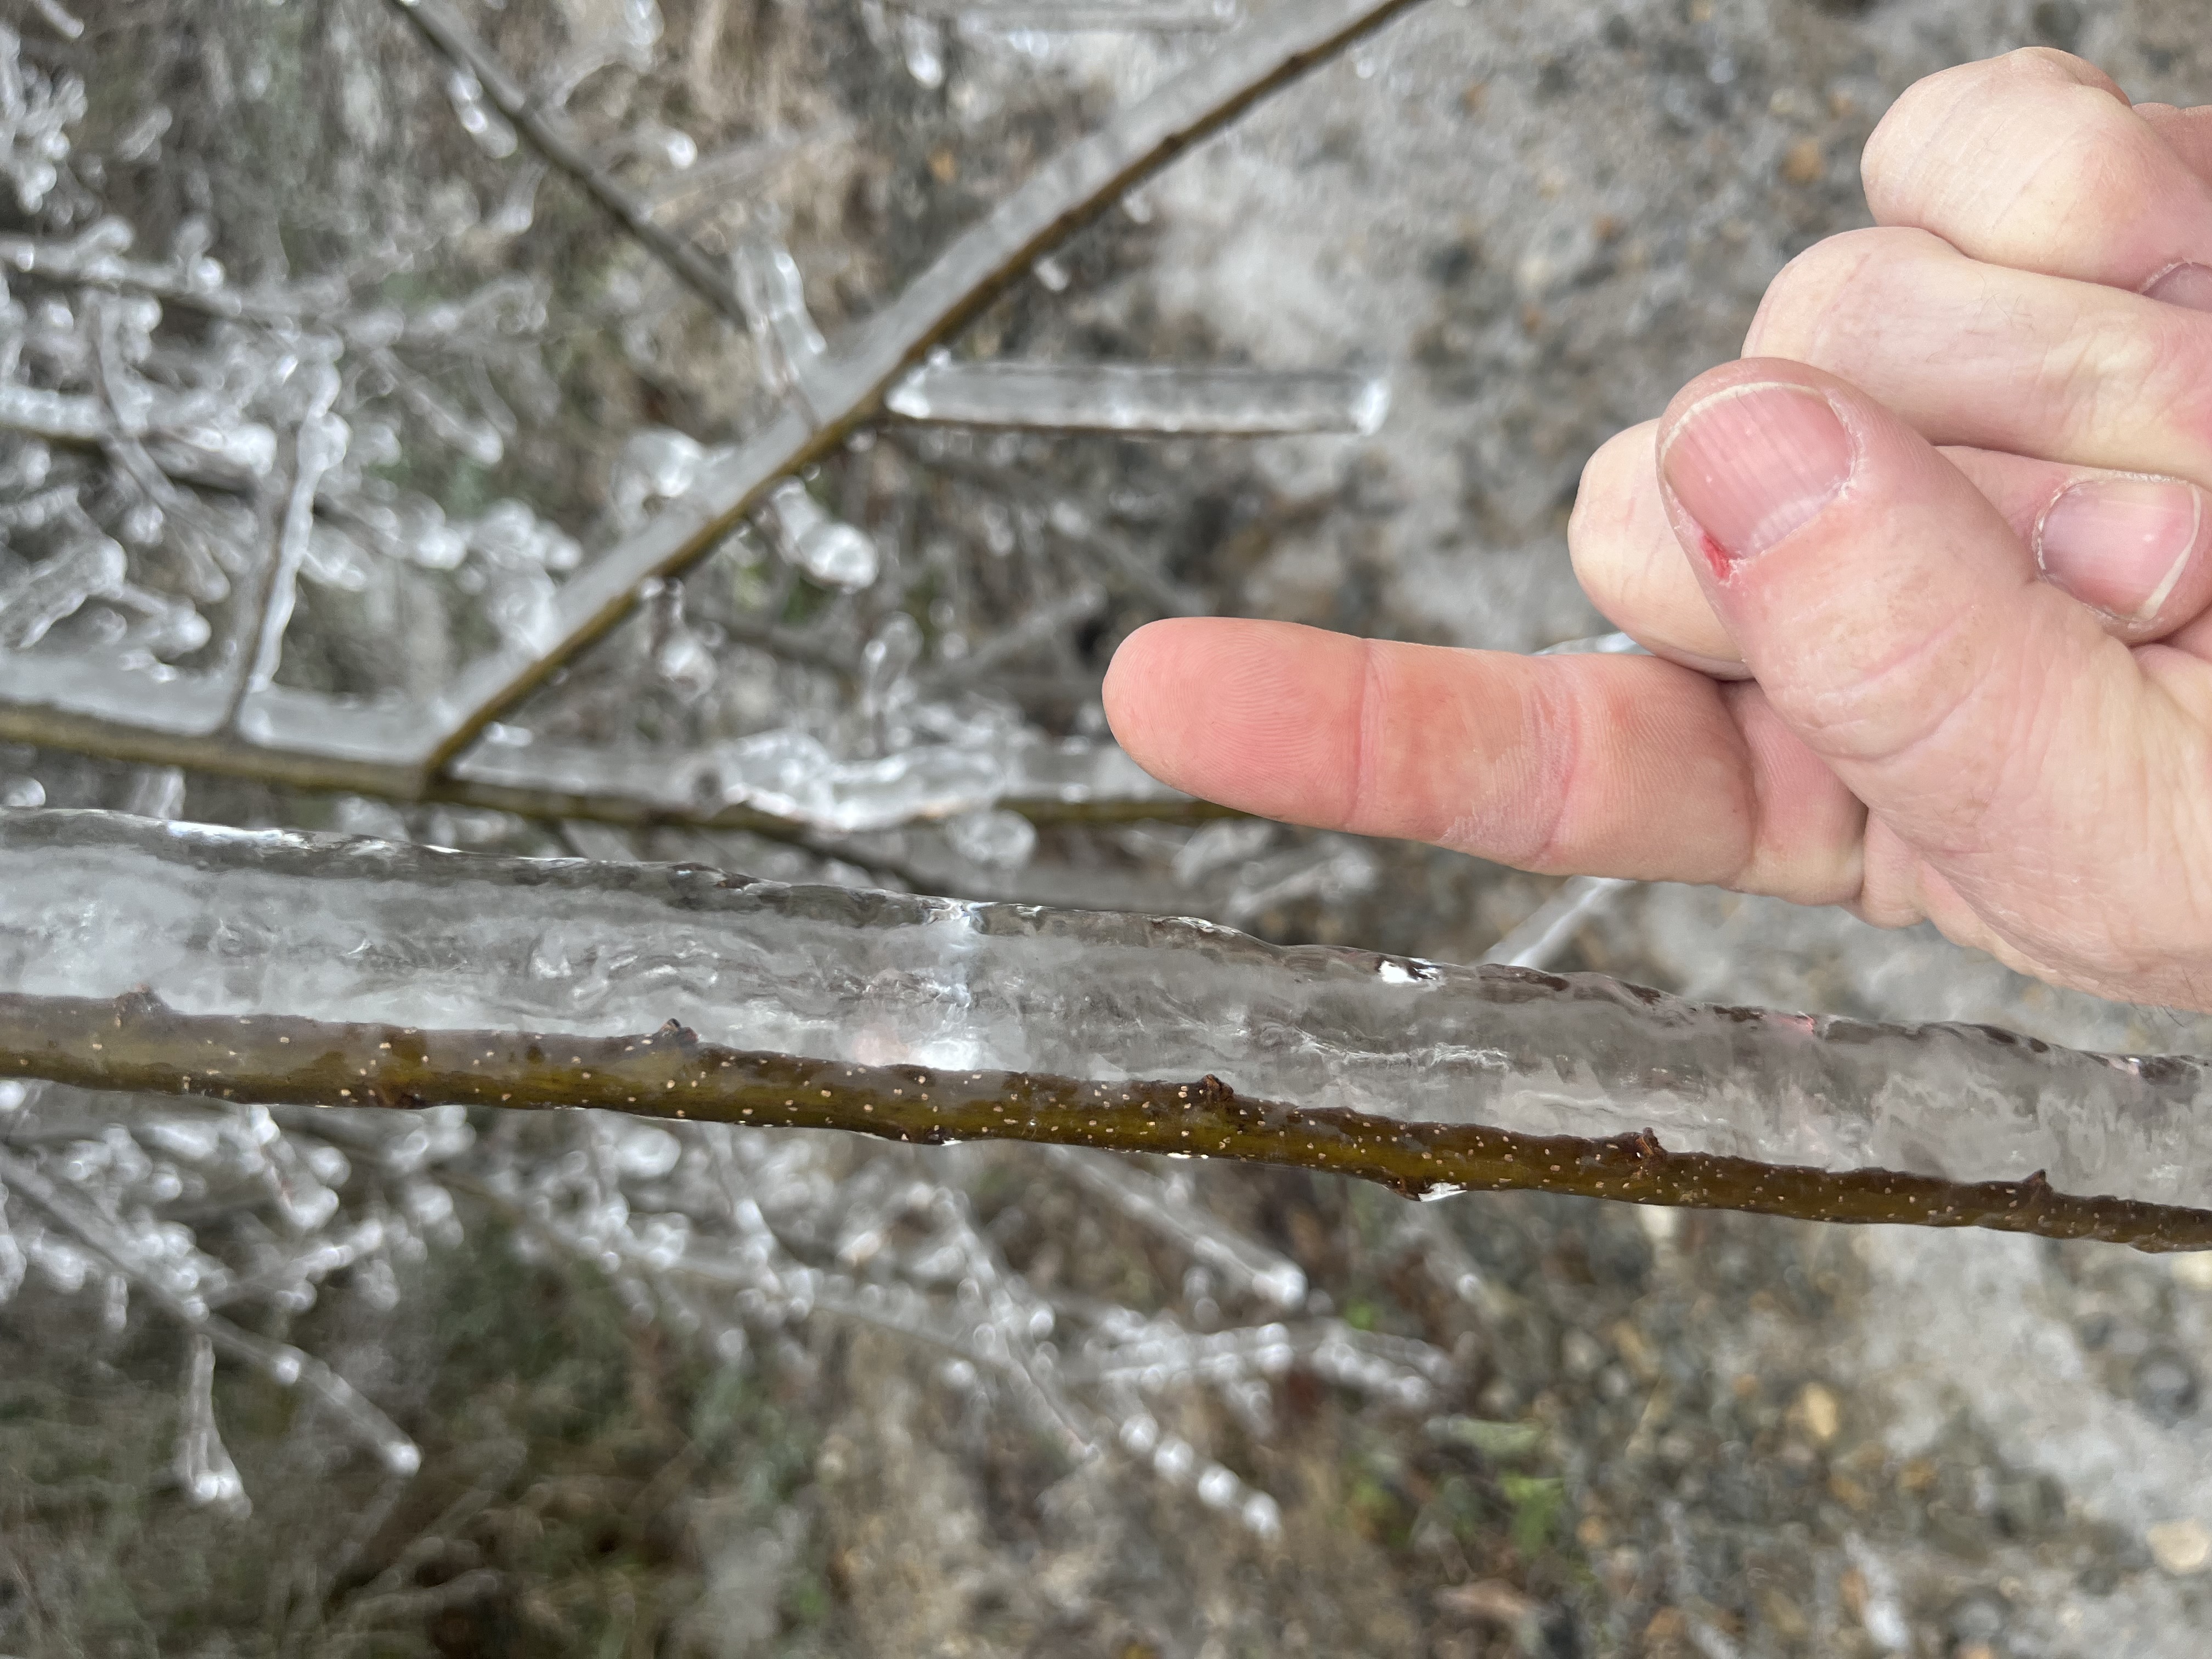 ice on a tree branch (Lamar County)